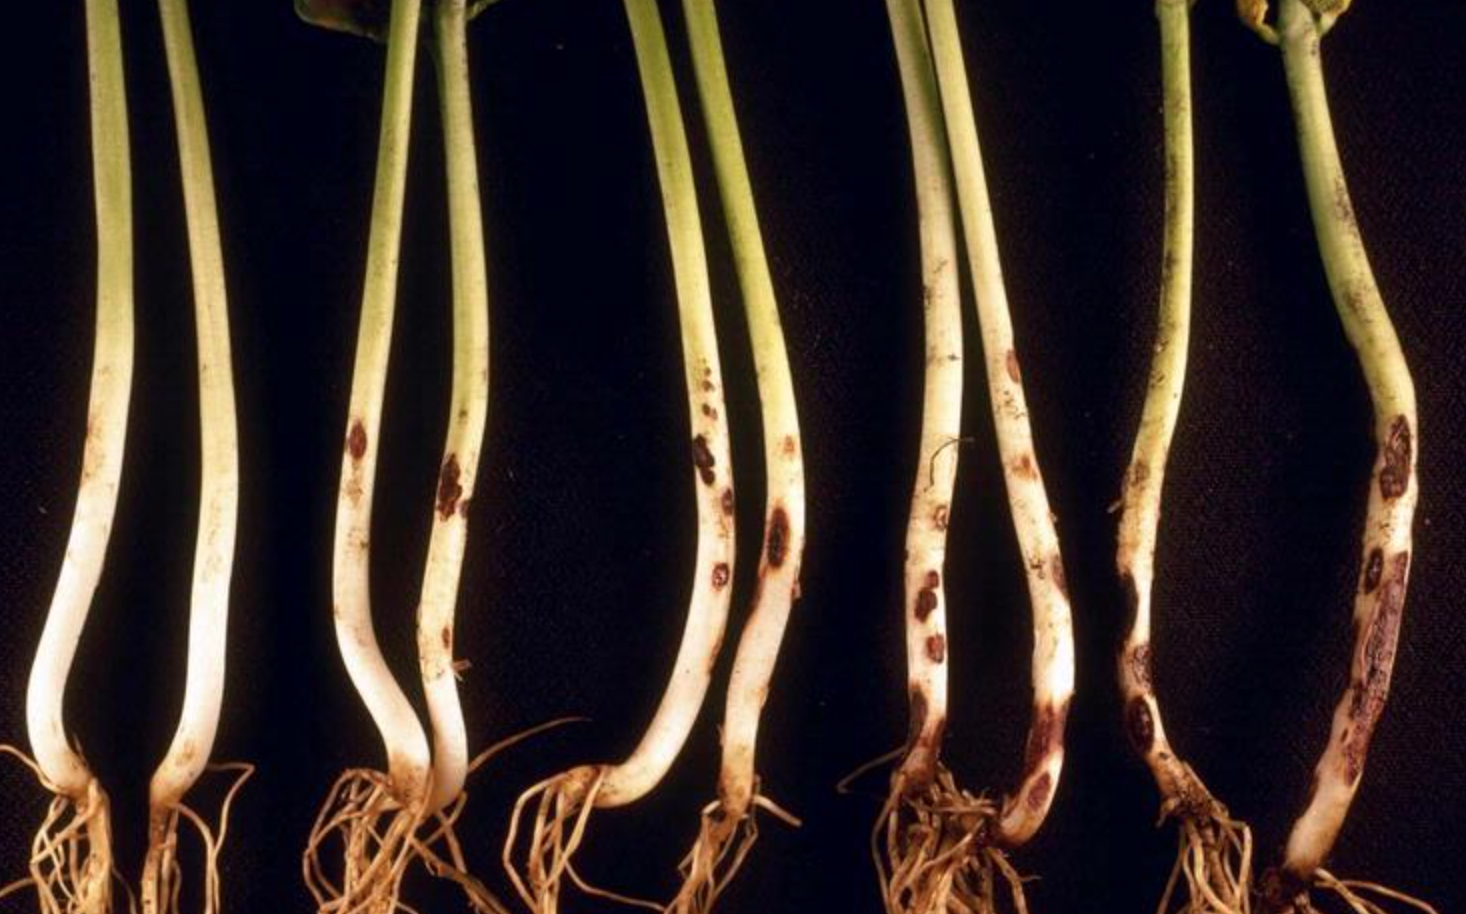   Rhizoctonia  infecting roots and shoots of common bean.&nbsp; 